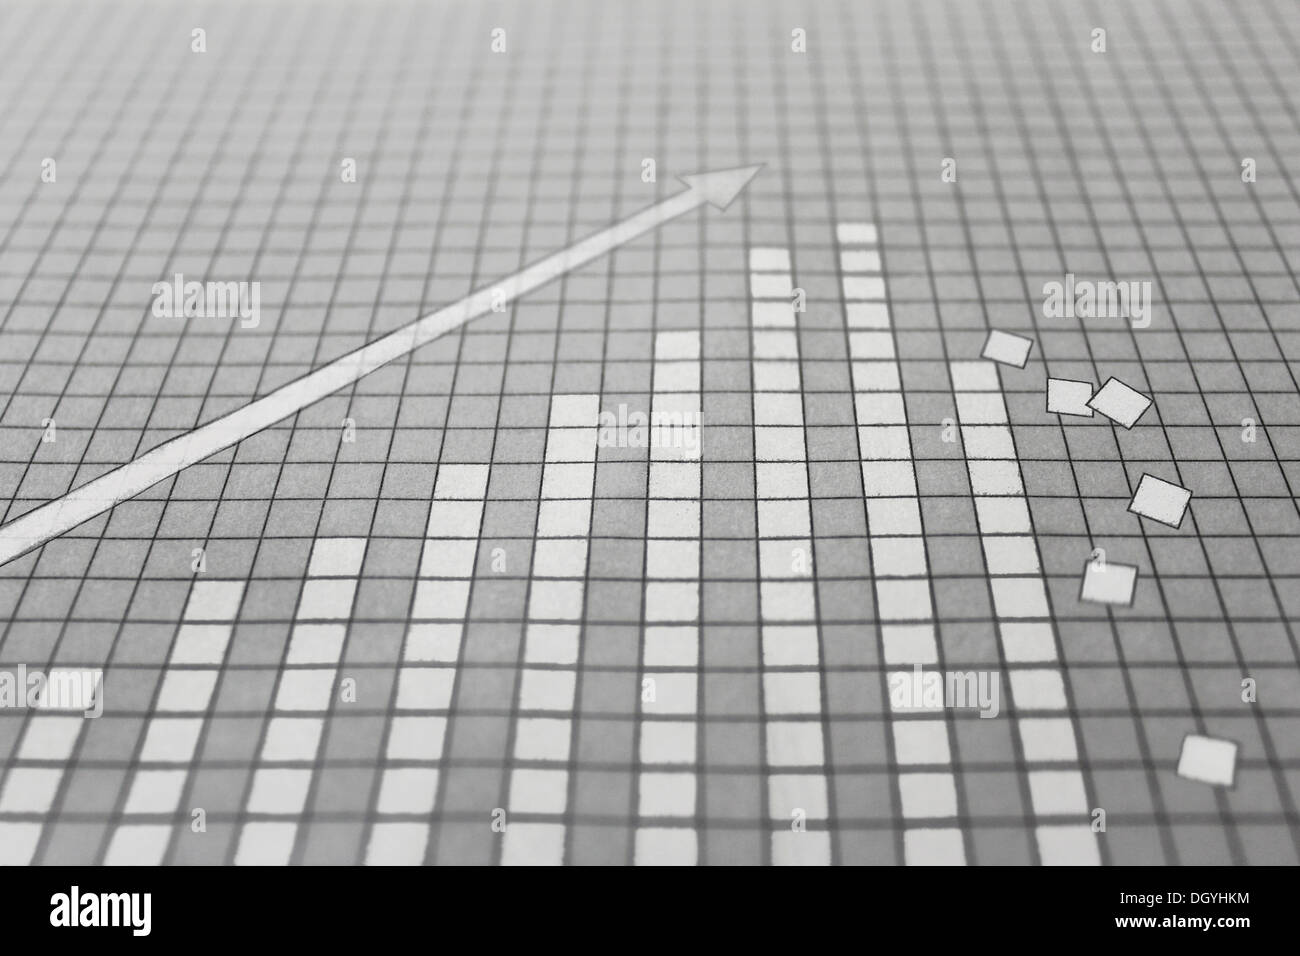 A bar graph depicting a rise and then a decline Stock Photo